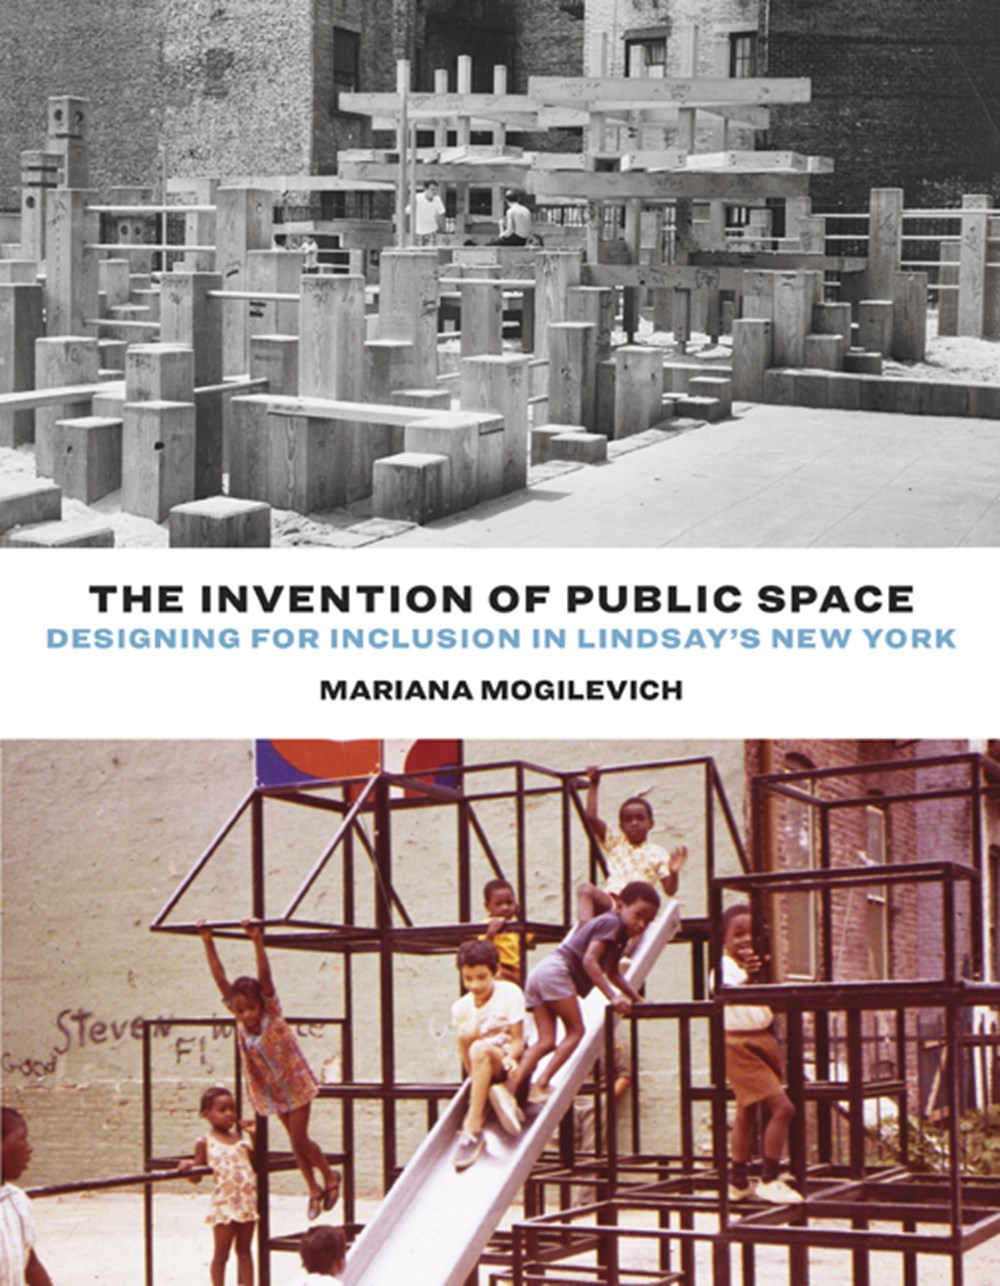 Invention of Public Space: Designing for Inclusion in Lindsay's New York